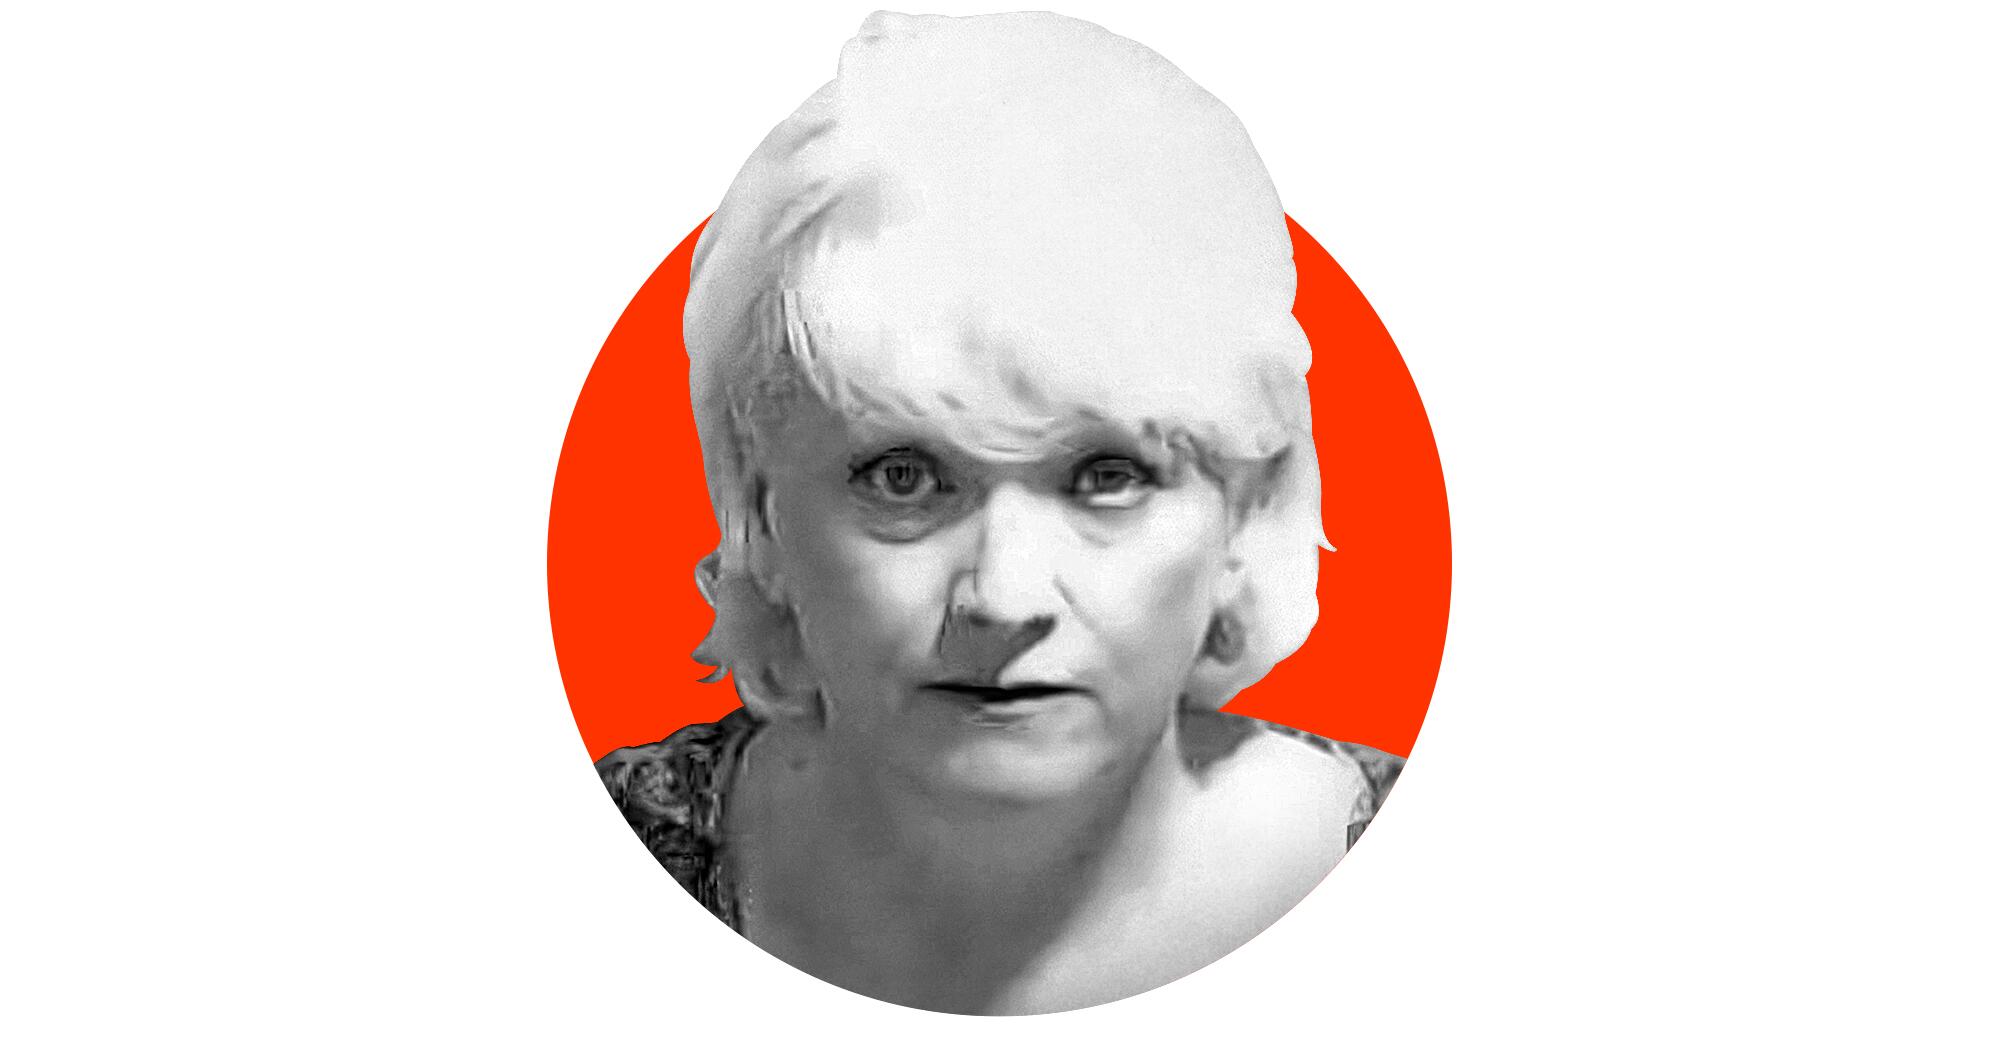 A black-and-white police mugshot of former Coffee County, Ga., GOP Chair Cathy Latham emerging from a red circle